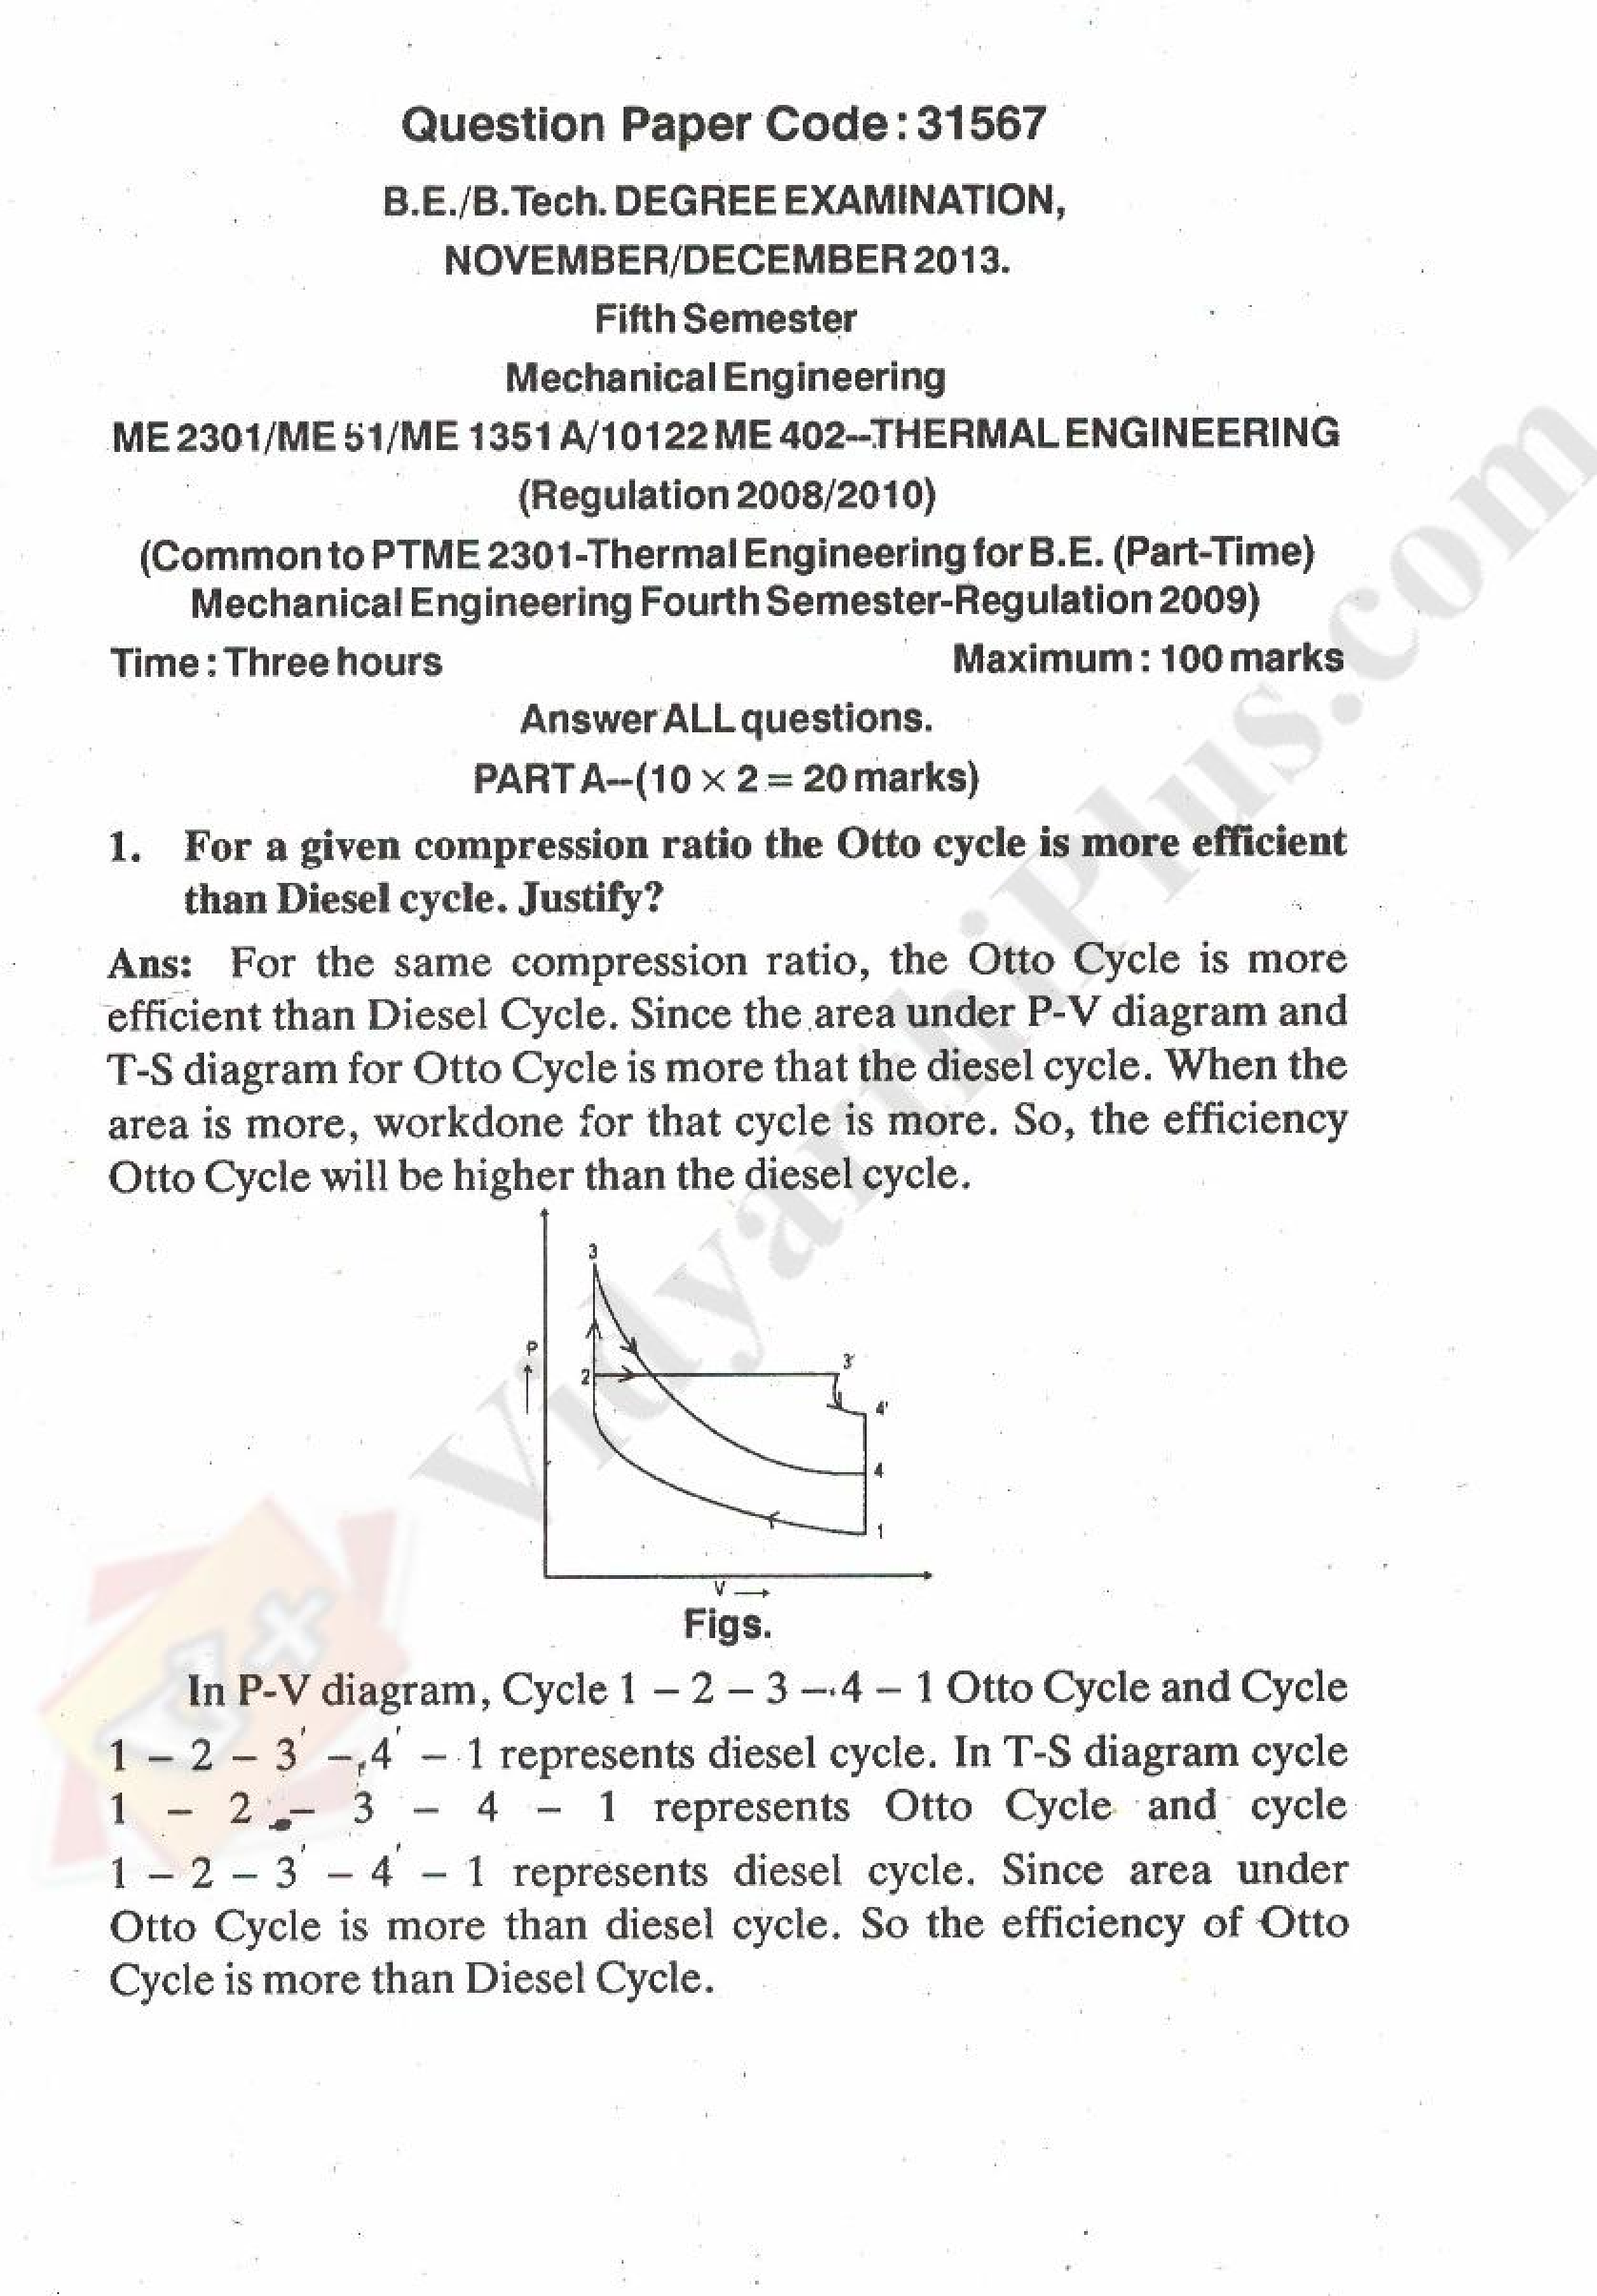 Thermal Engineering Solved Question Papers - 2015 Edition